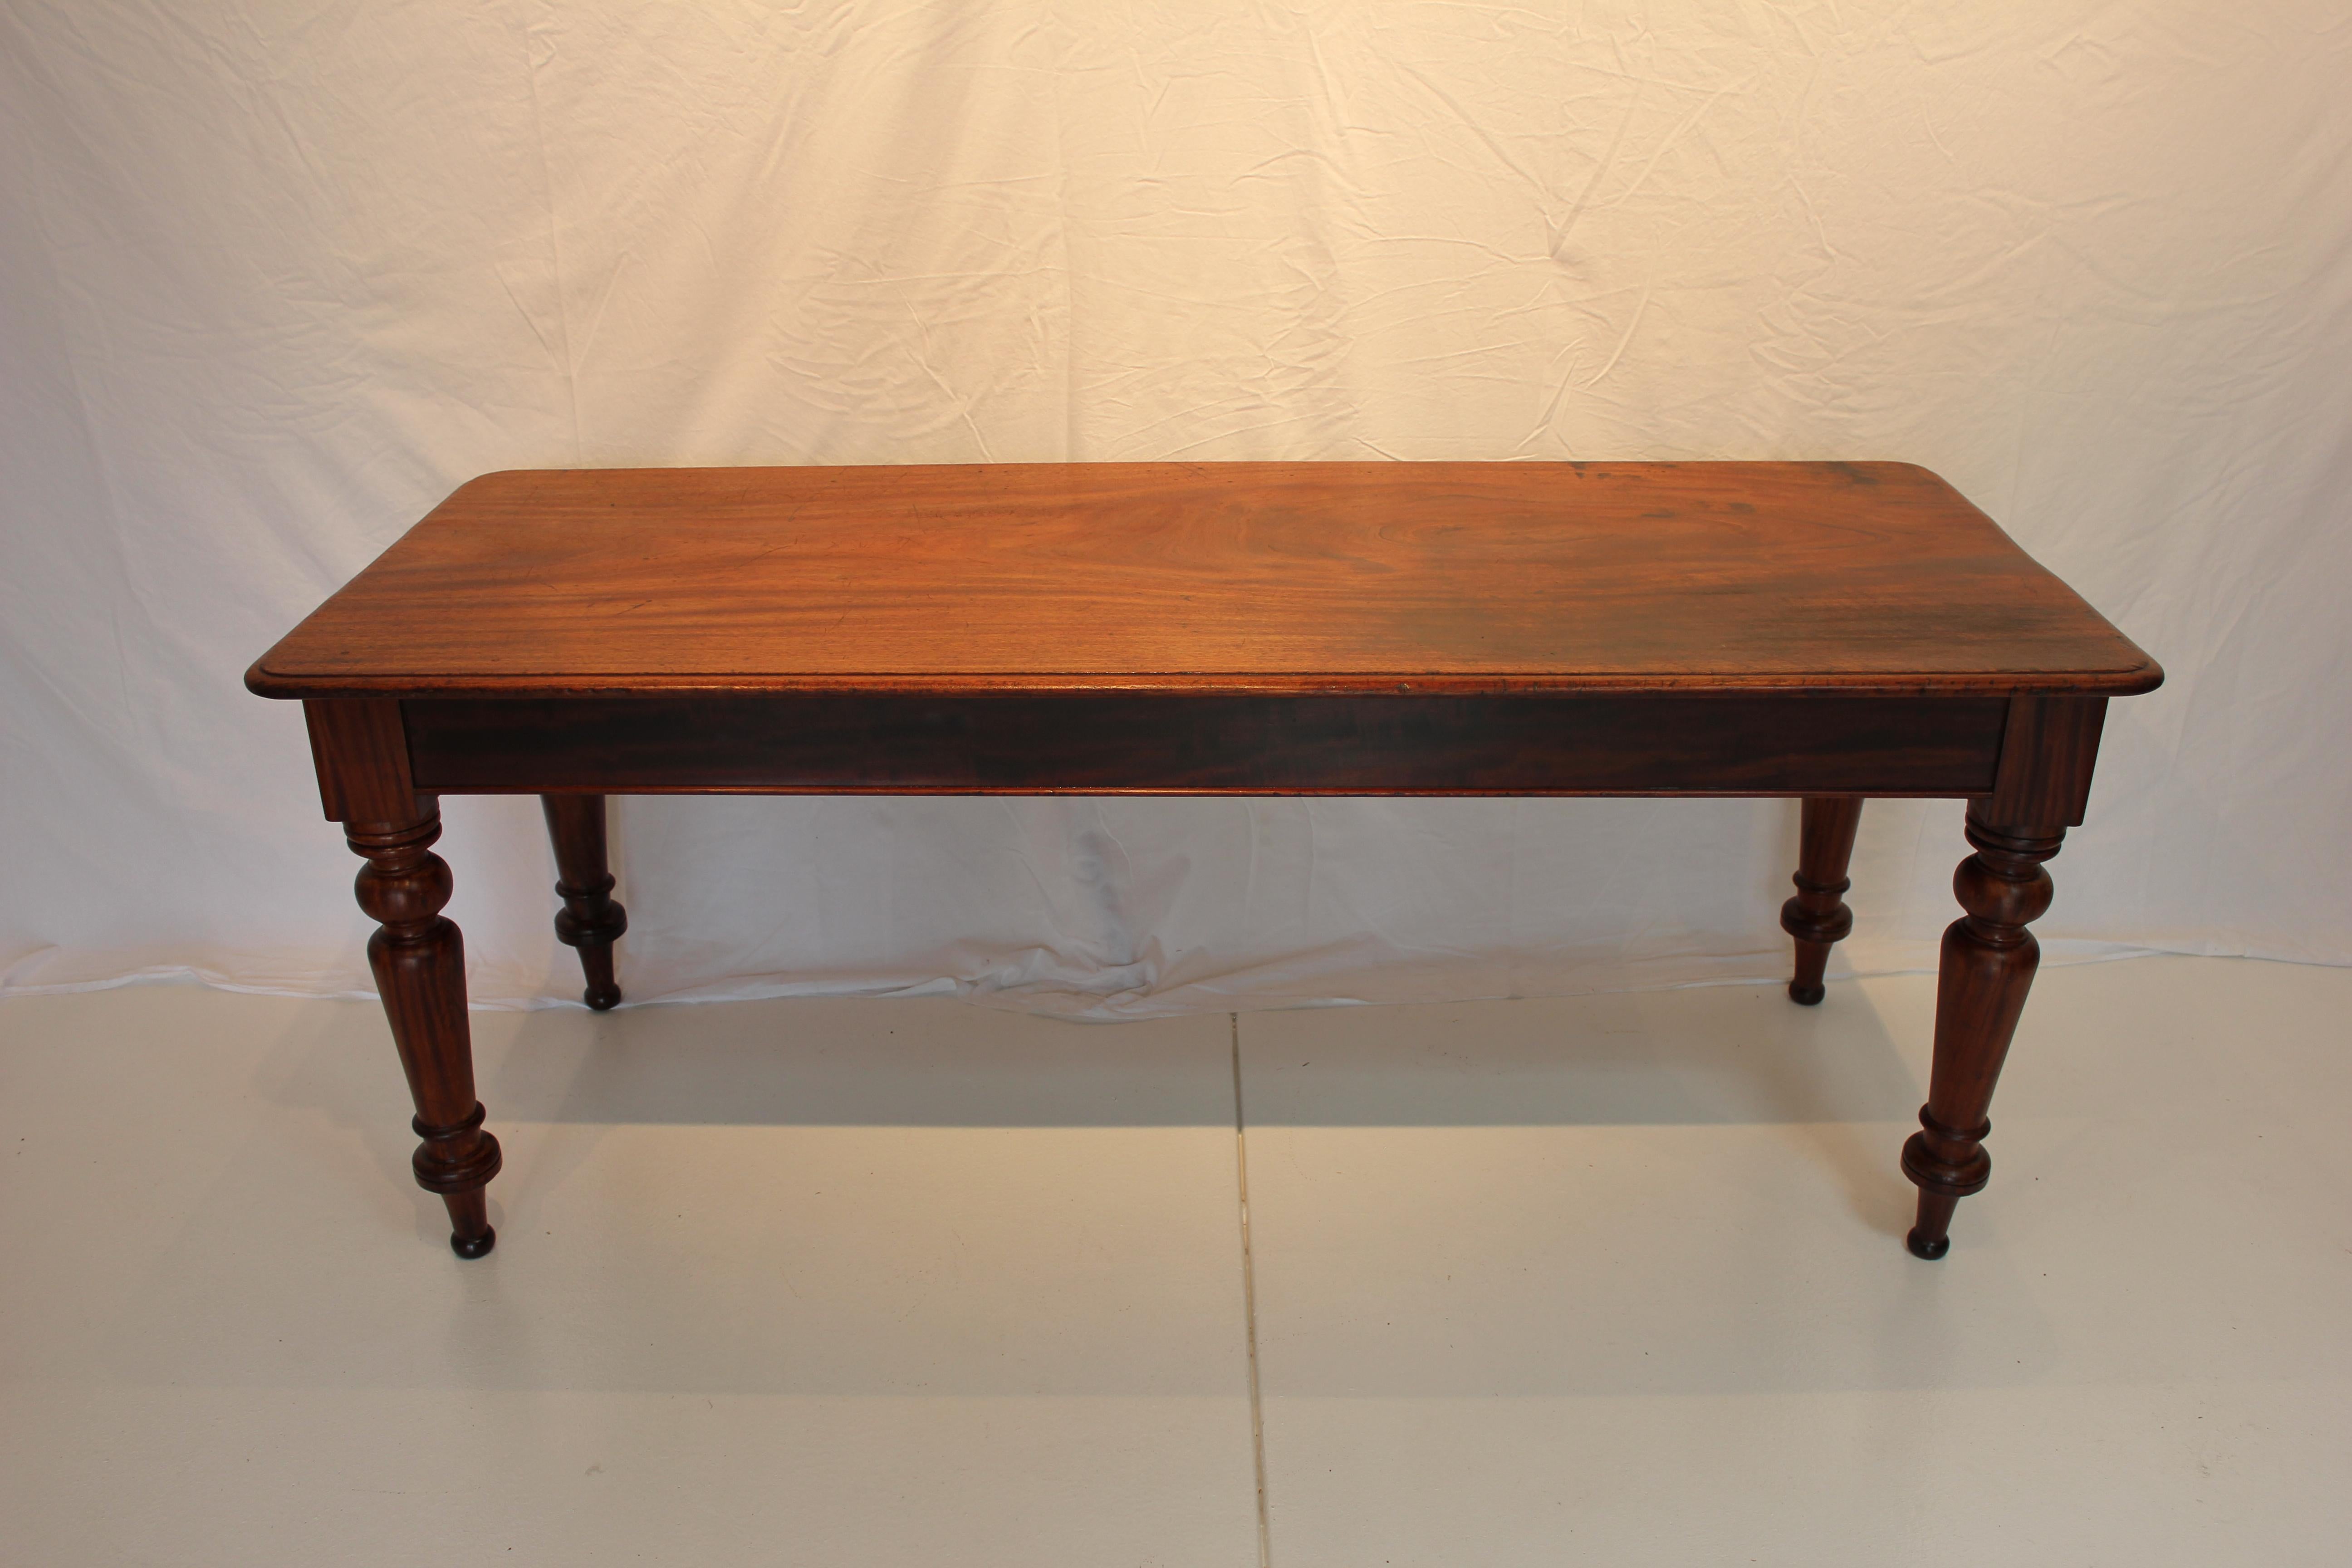 American Colonial Antique American Mahogany Kitchen Dining Table 1 Plank Top Late 19th Century For Sale